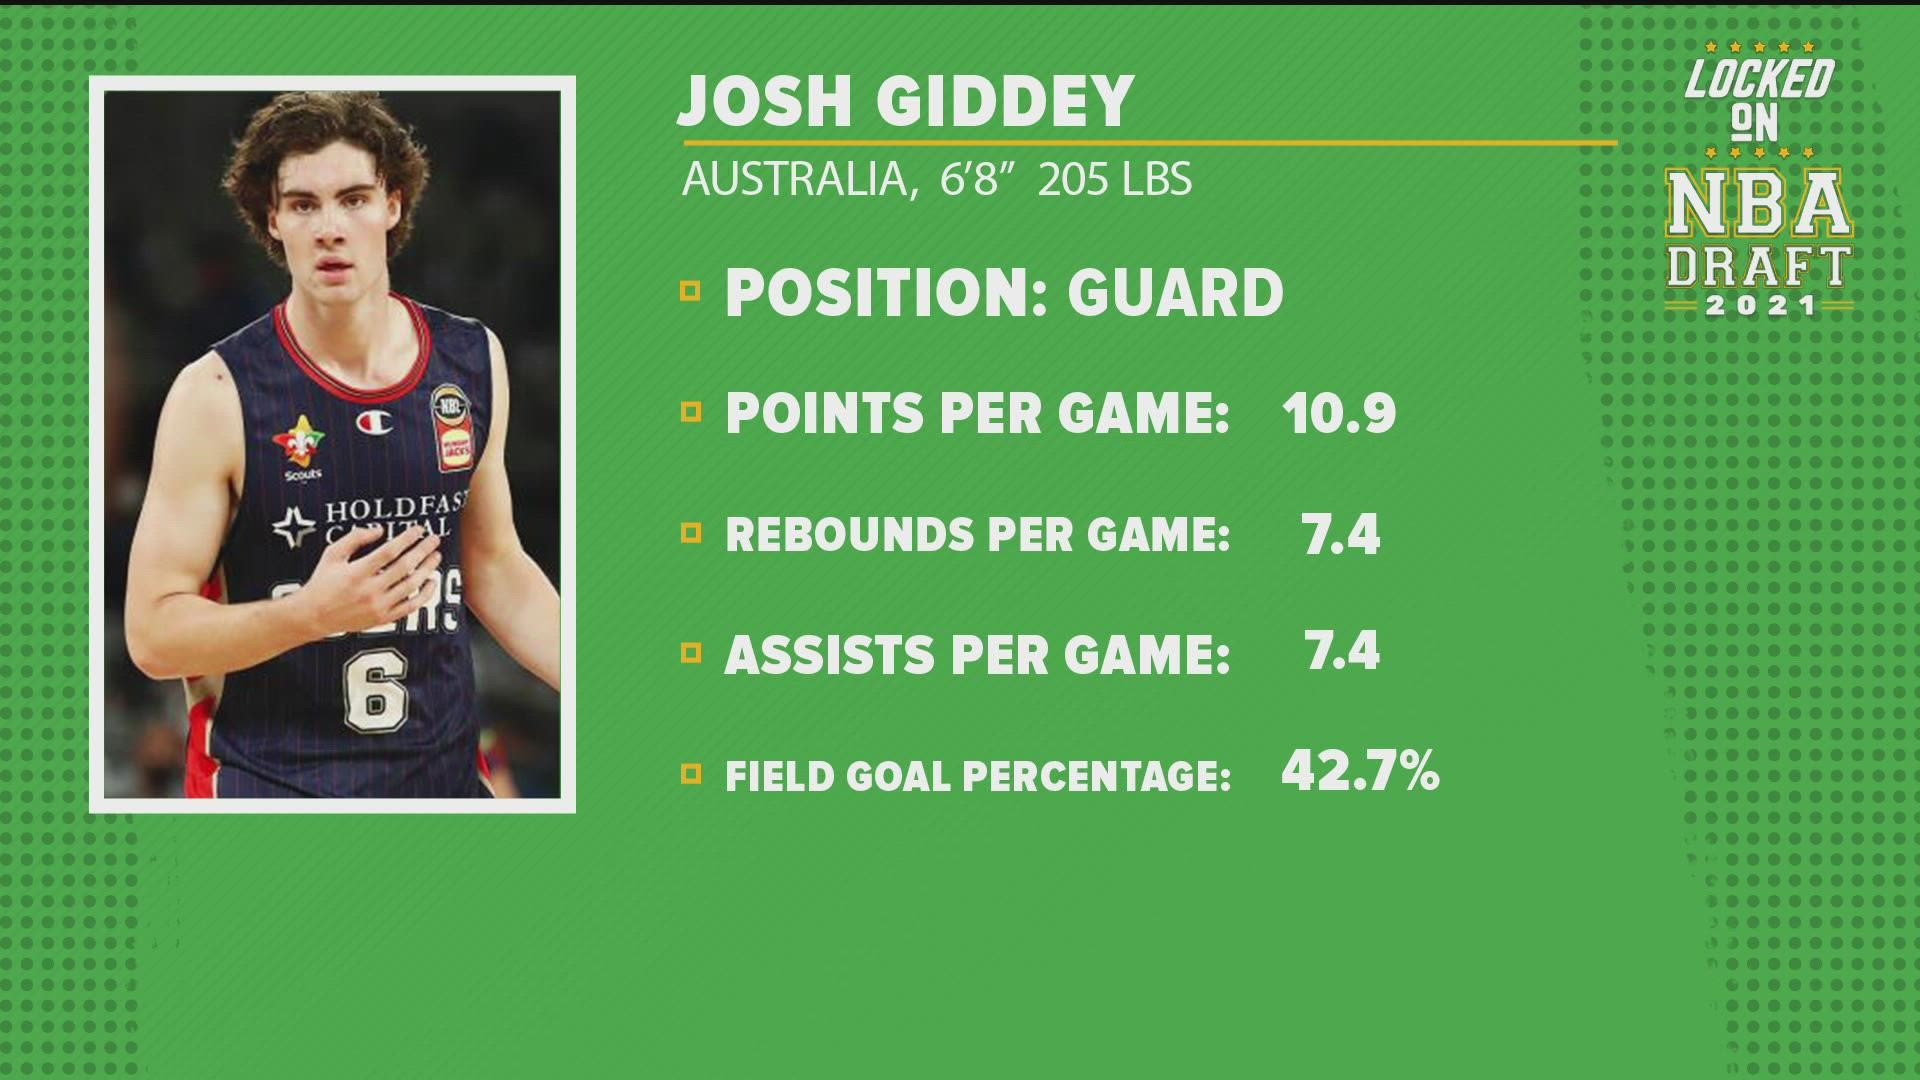 Our NBA Draft experts react to a surprising pick from the Thunder at No. 6 in Australia's Josh Giddey.